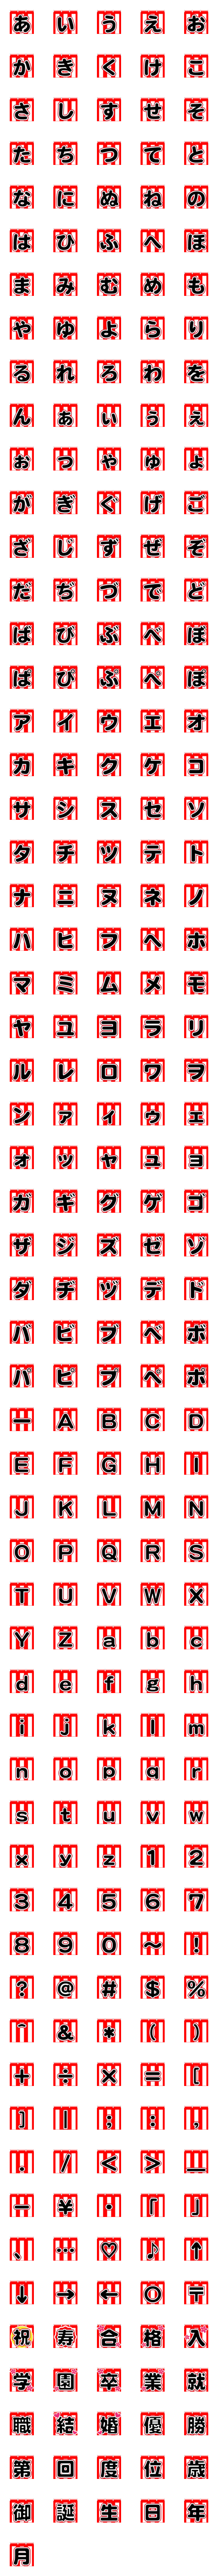 [LINE絵文字]紅白幕 デコ文字 絵文字 お祝い めでたいの画像一覧